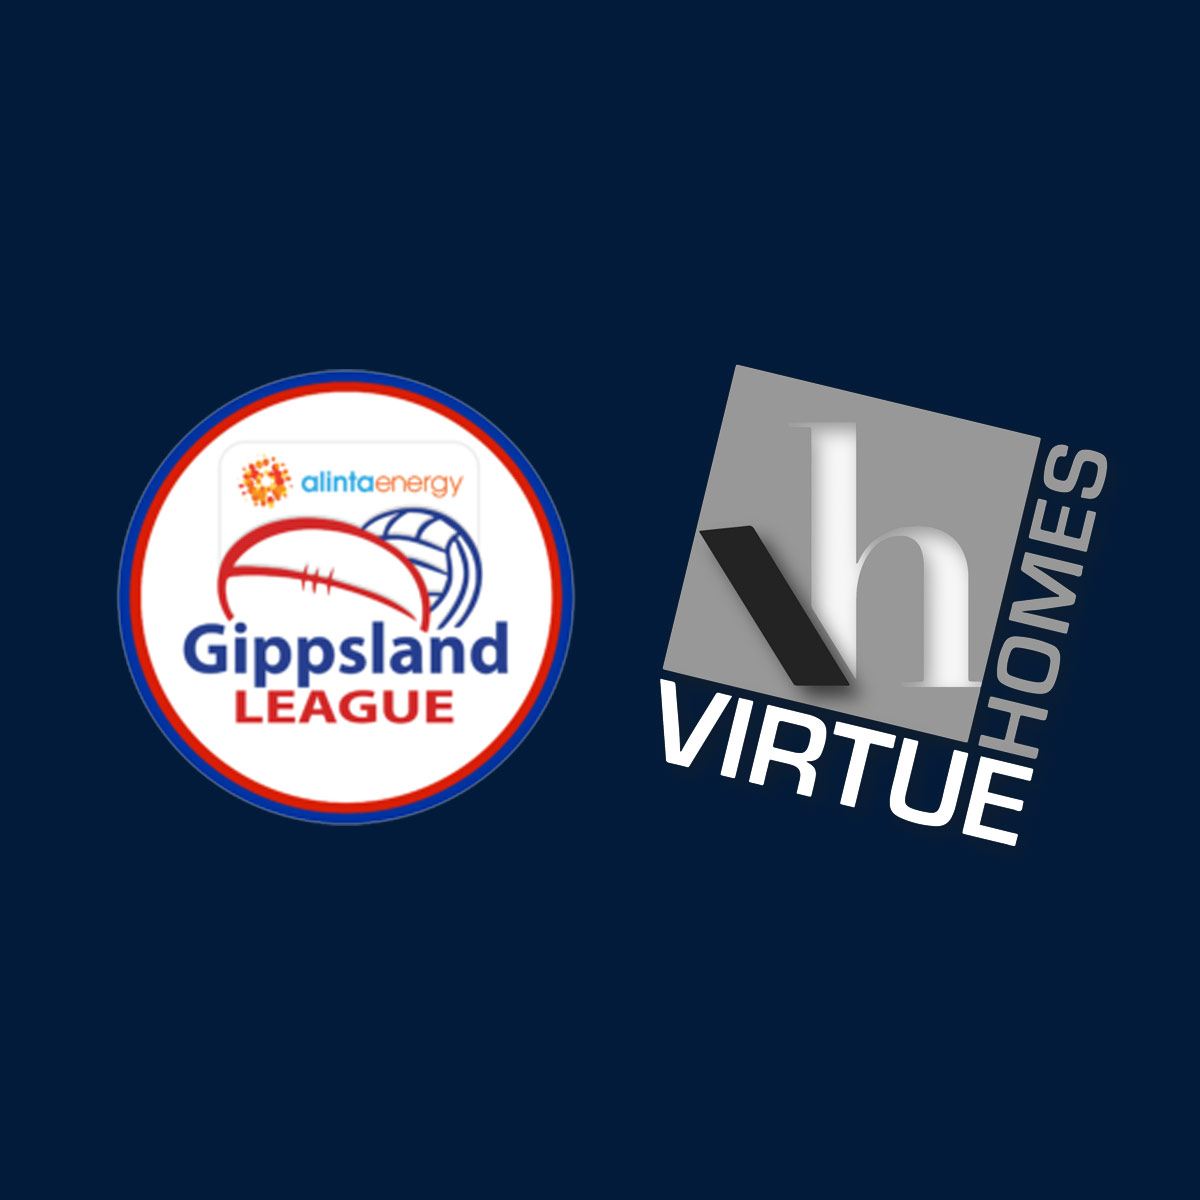 Image of logos for Gippsland League sports and Virtue Homes sitting on a dark blue background.